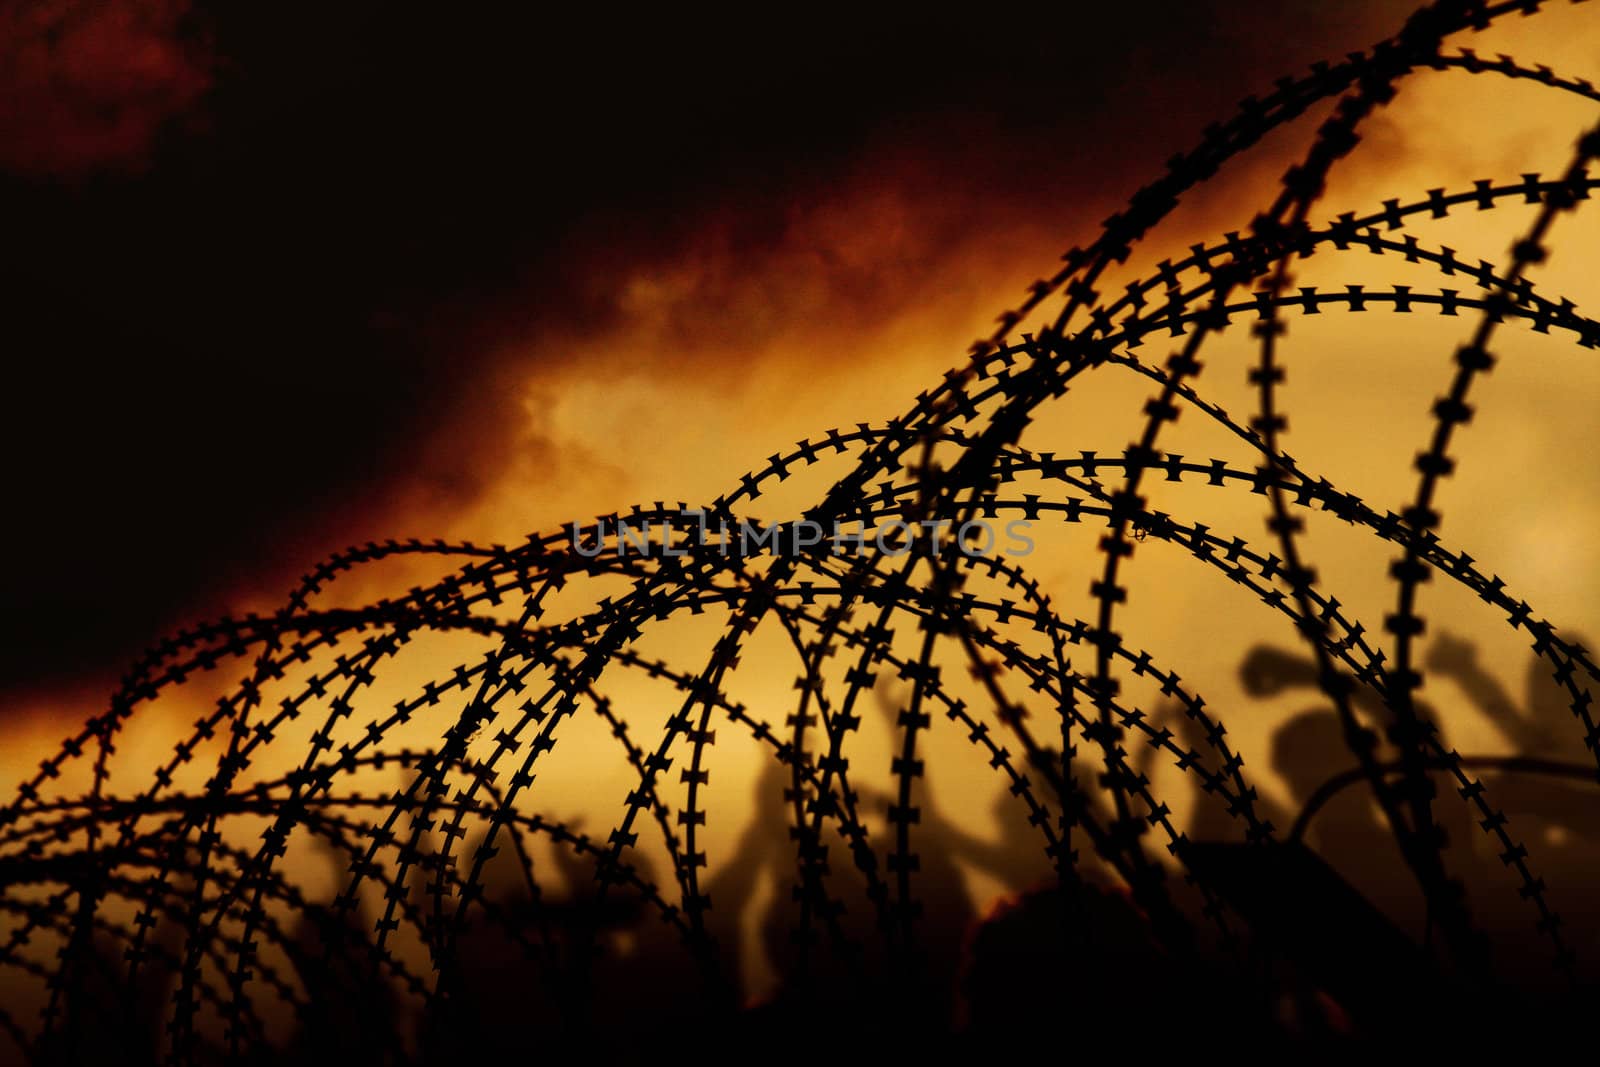 barbed wire by Hasenonkel